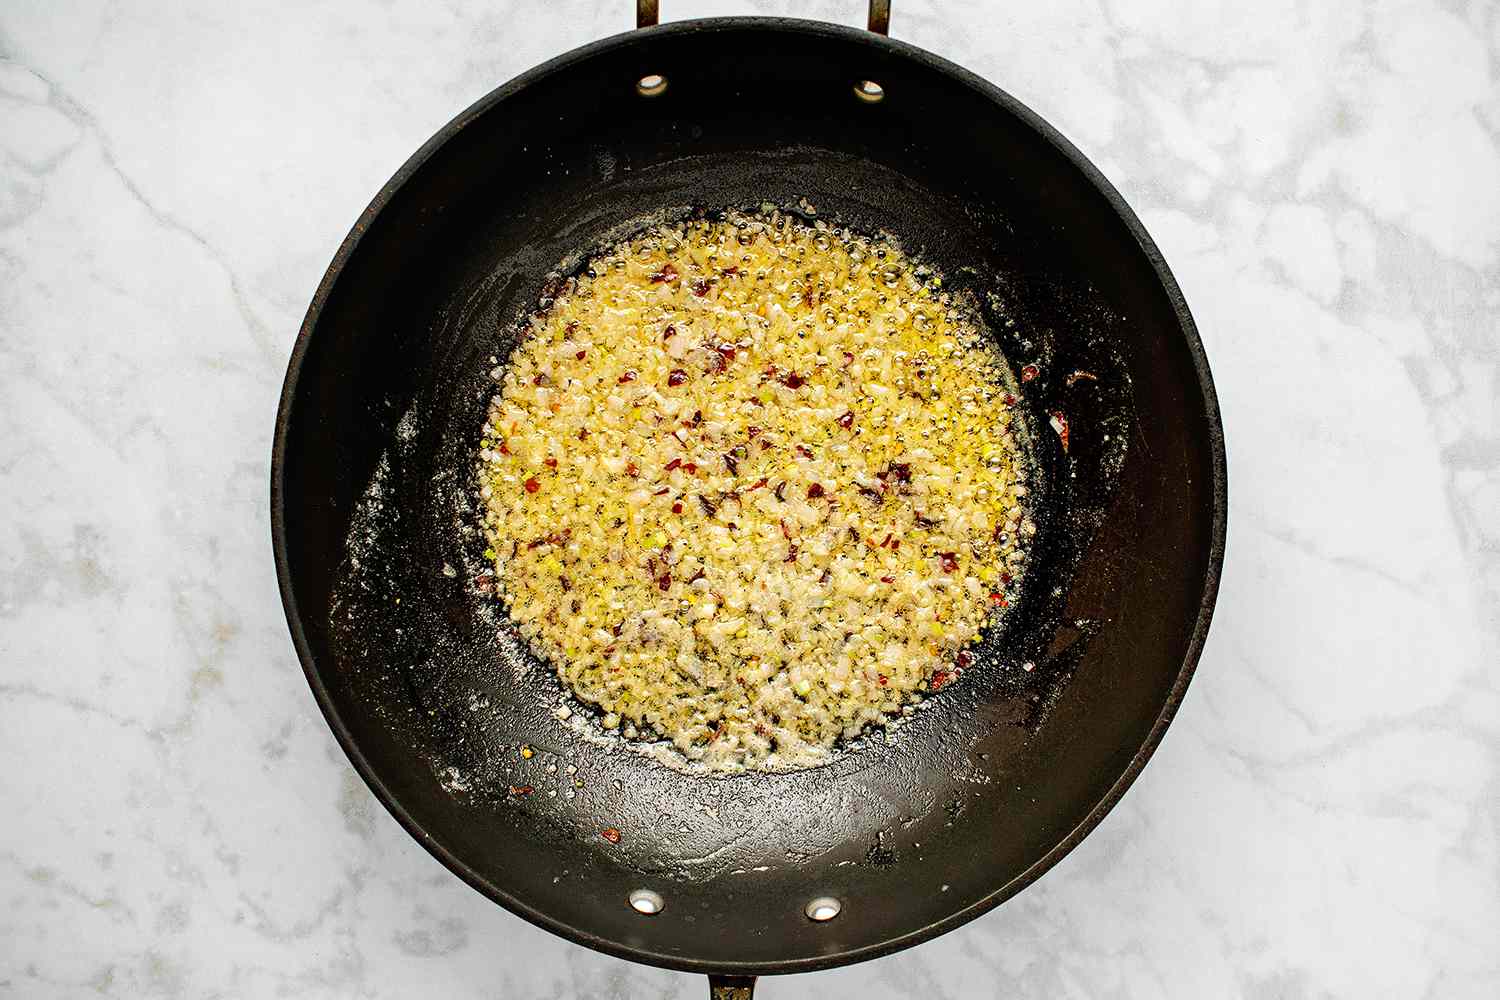 Shallot and crushed red pepper in a pan 